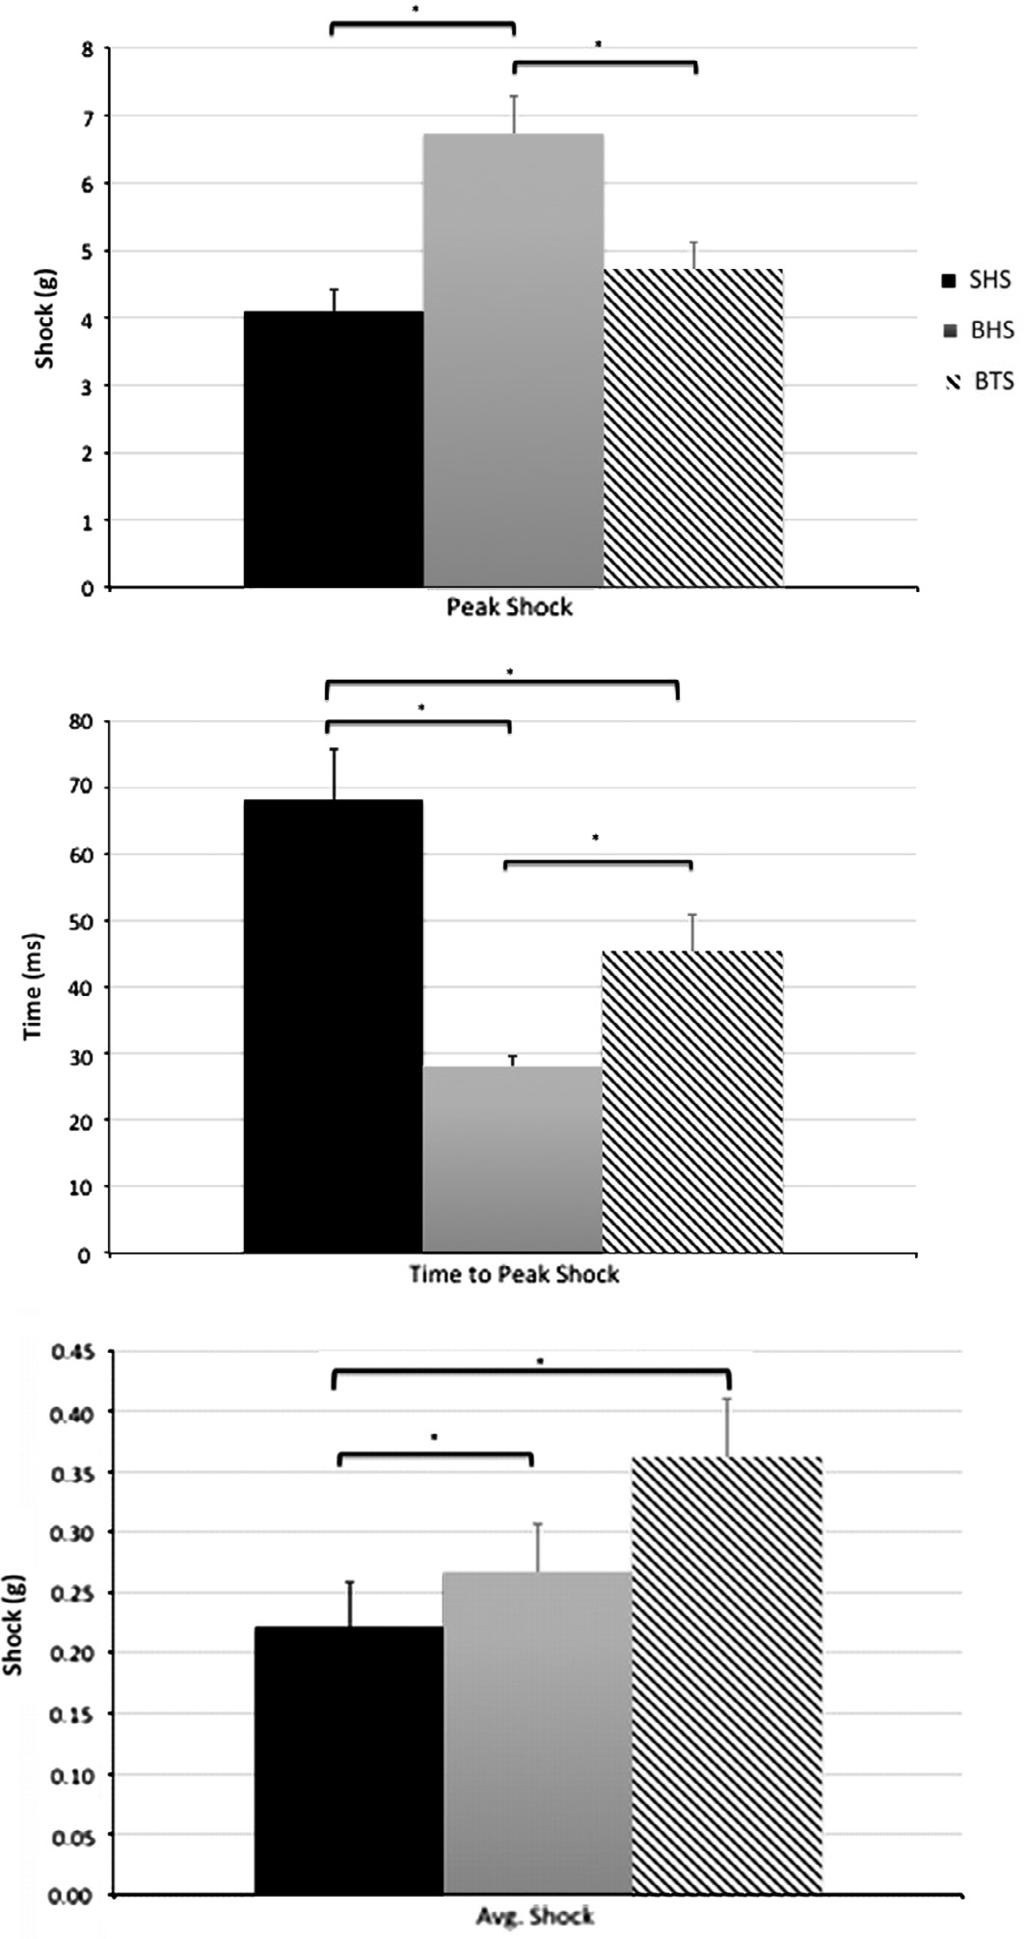 E.D. Olin, G.M. Gutierrez / Human Movement Science 32 (2013) 343 352 347 Fig. 1. Peak shock (top; in g), time to peak shock (middle; in ms), and average shock (bottom; in g) in all 3 conditions.